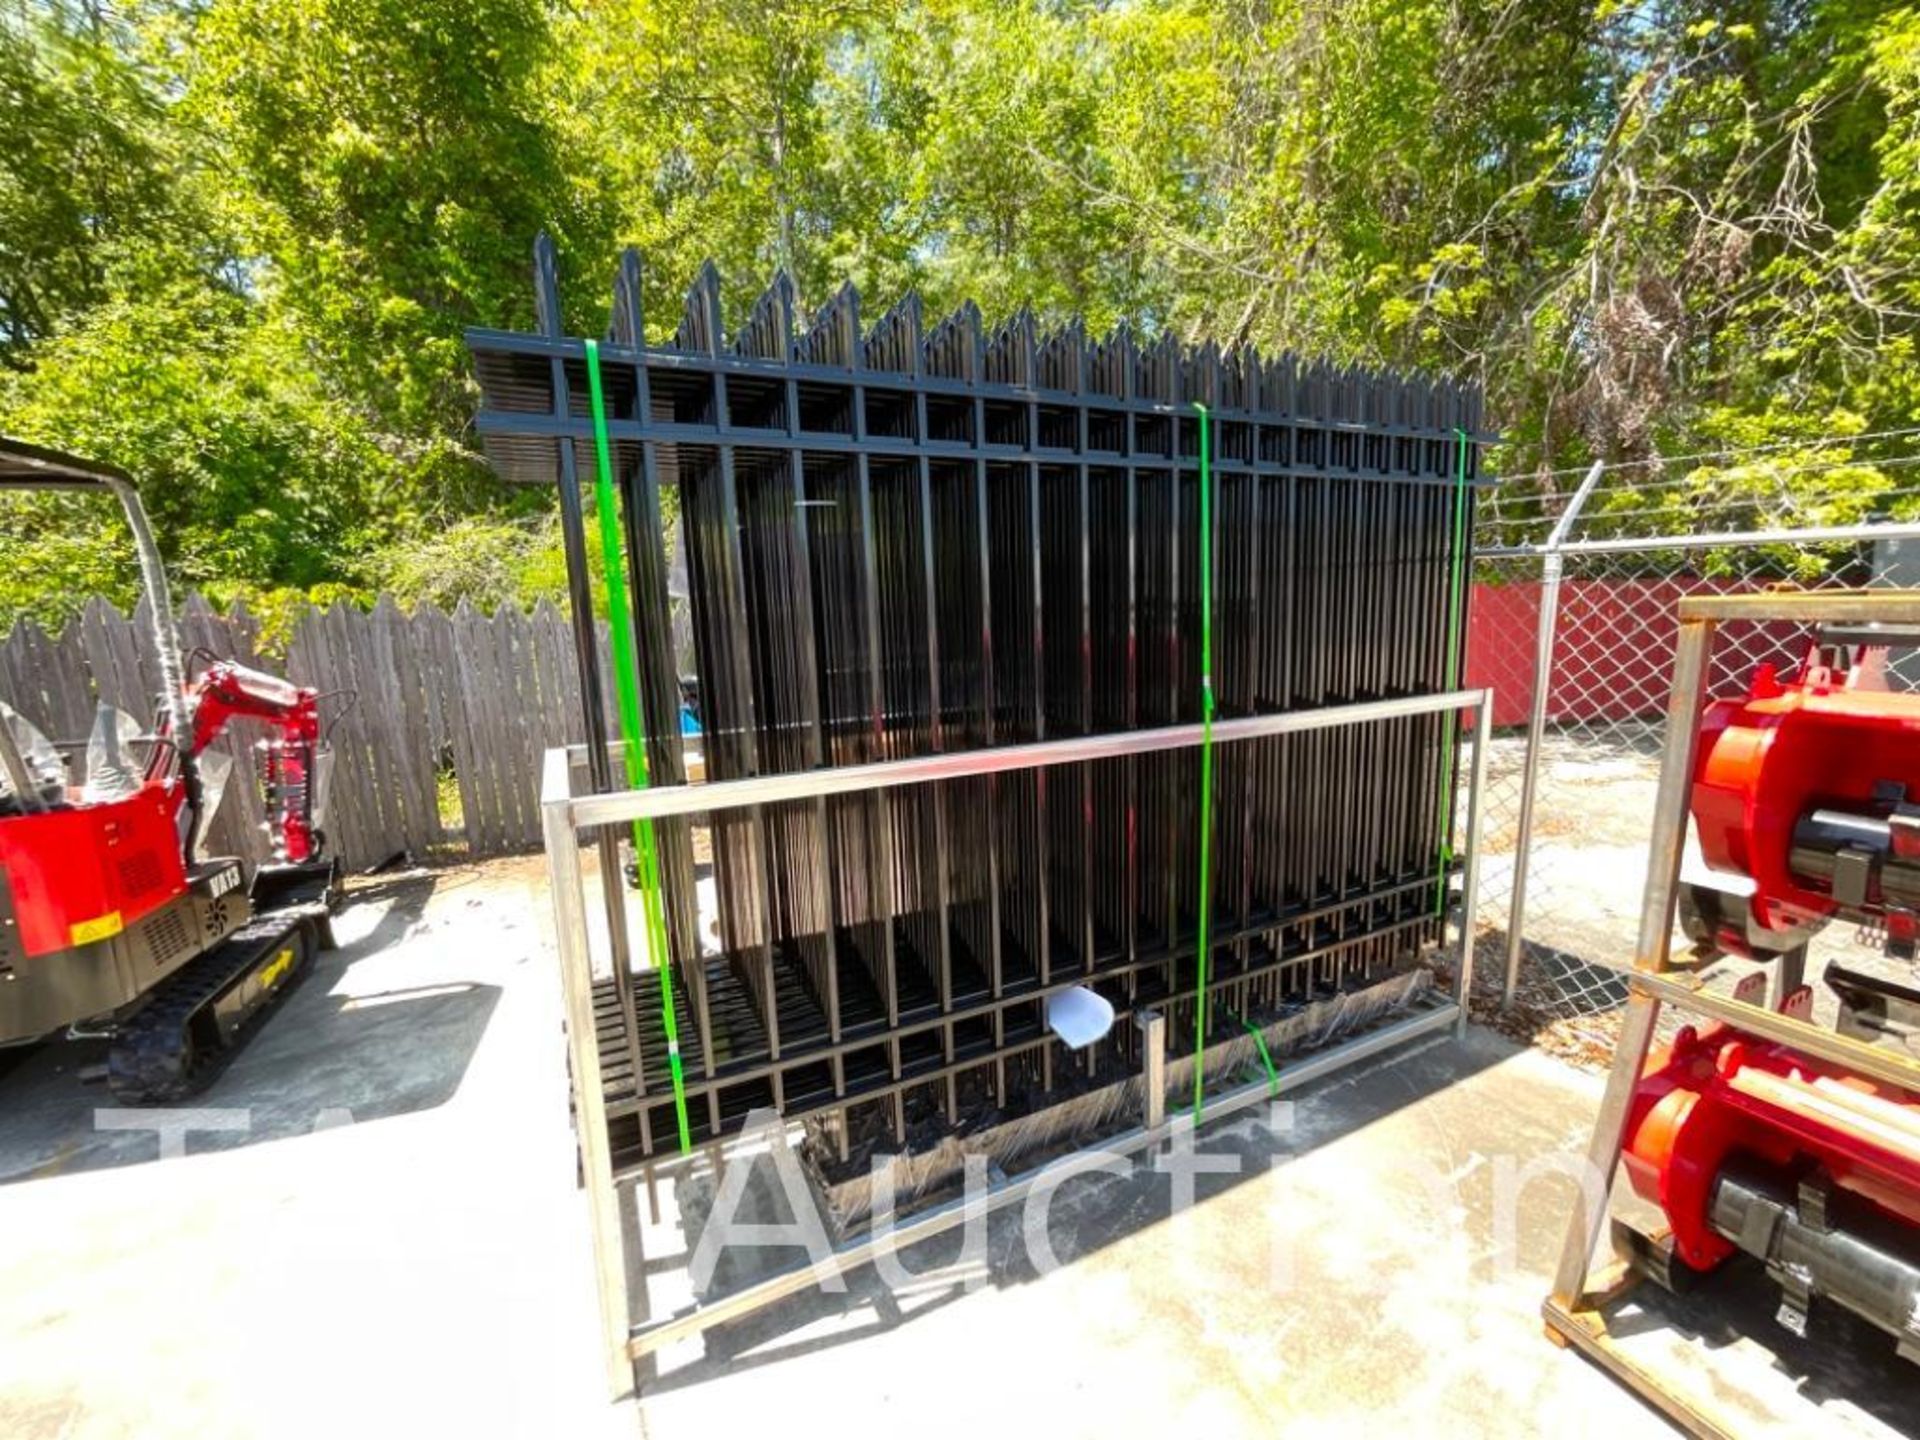 New Powder Coated Galvanized Steel Fencing - Image 2 of 4